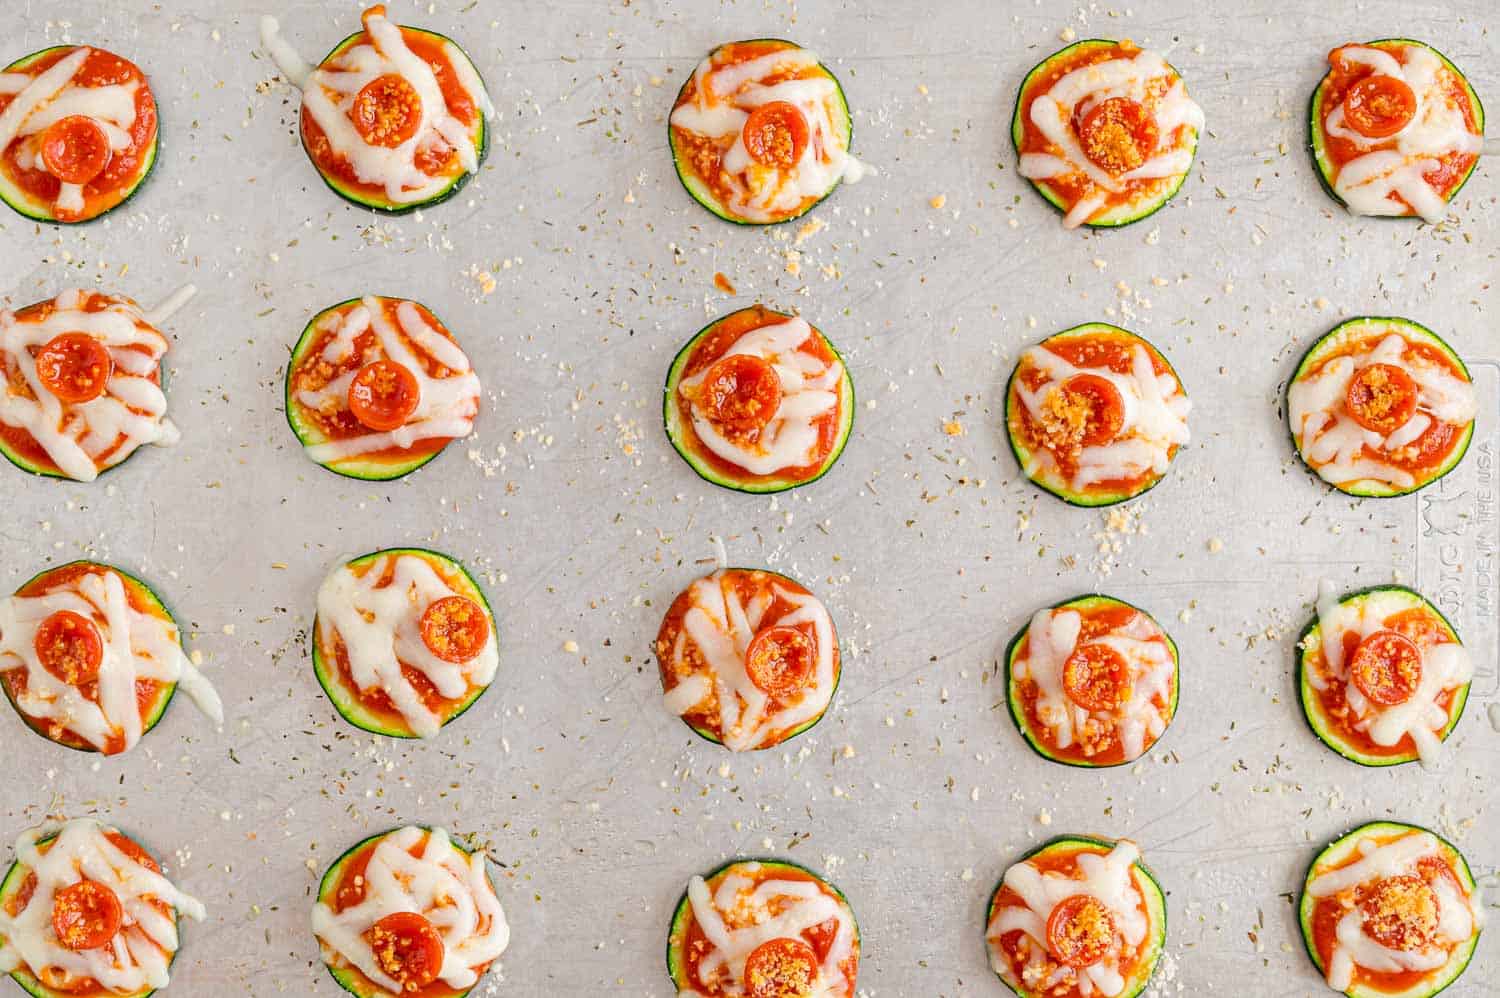 Zucchini pizza slices on a sheet pan.